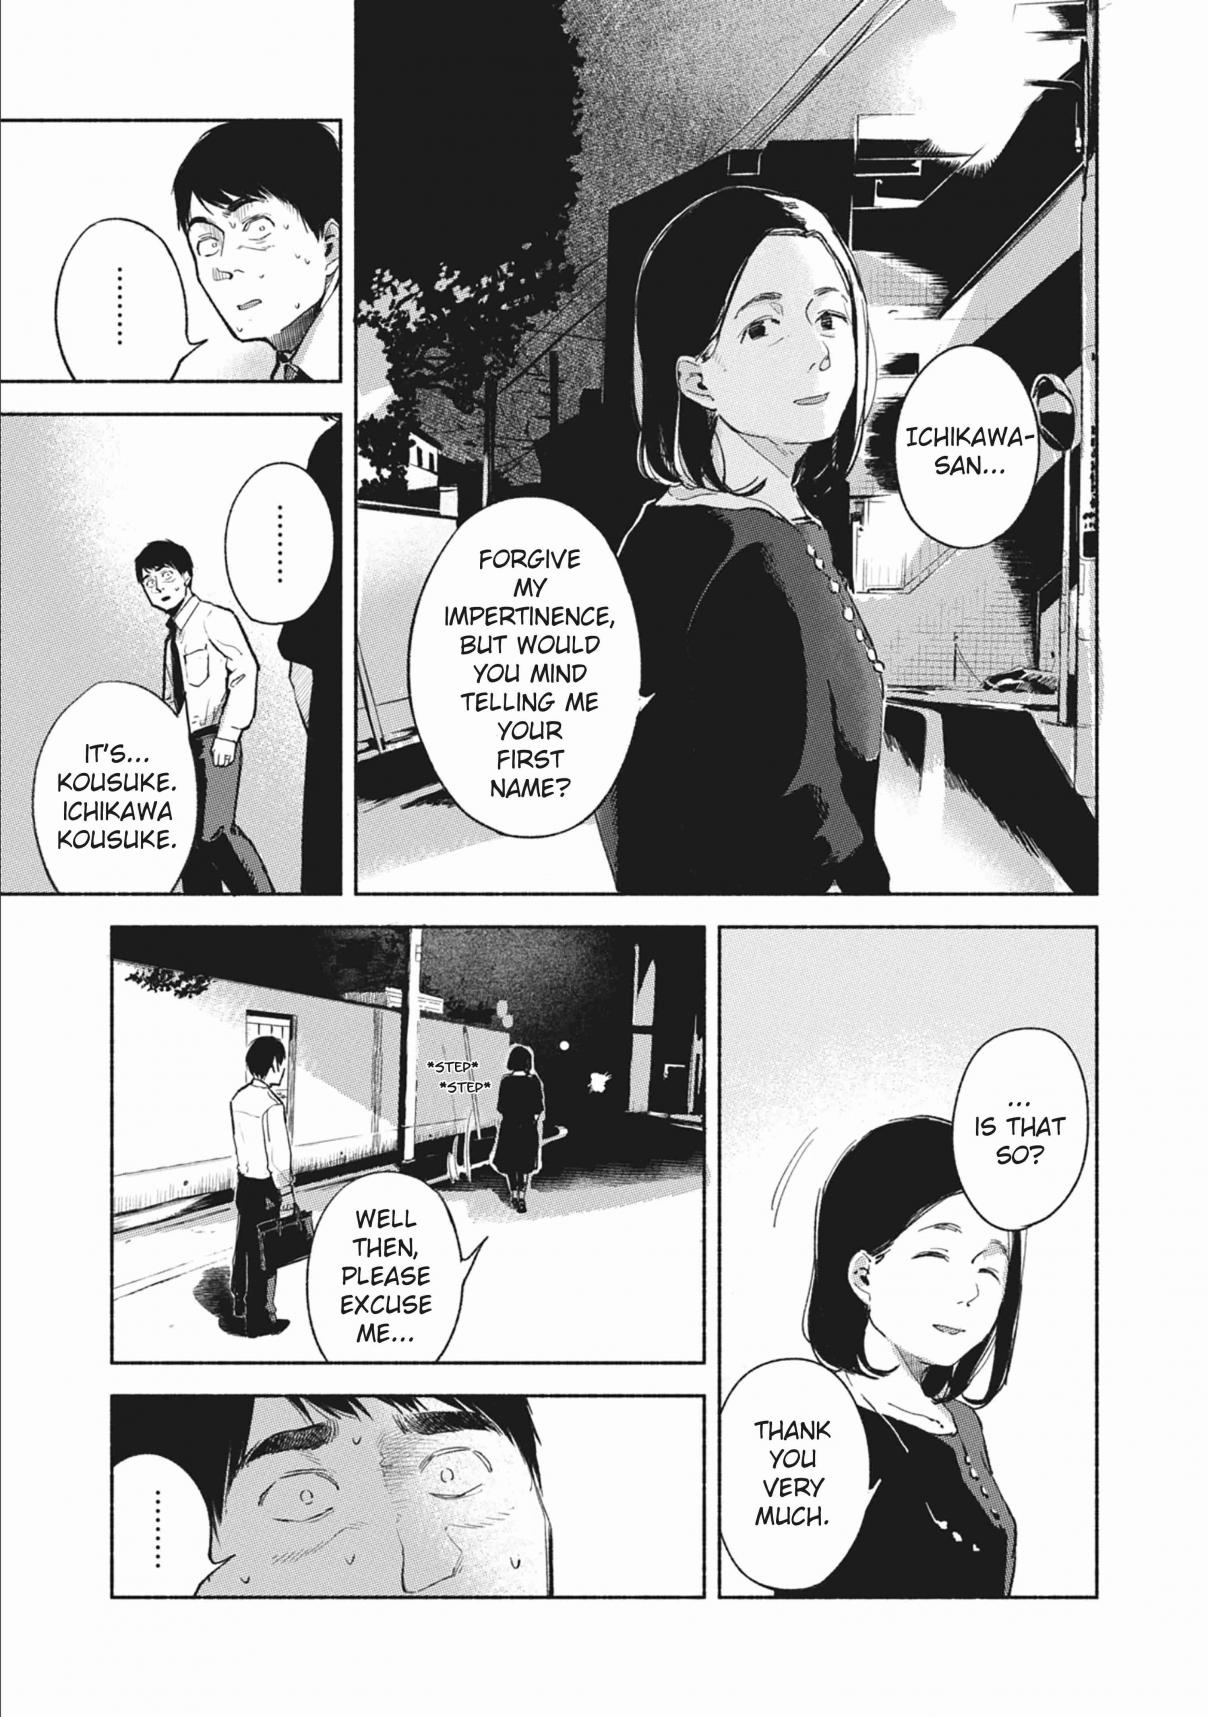 Musume no Tomodachi Vol. 4 Ch. 35 A Man Sniffed Out